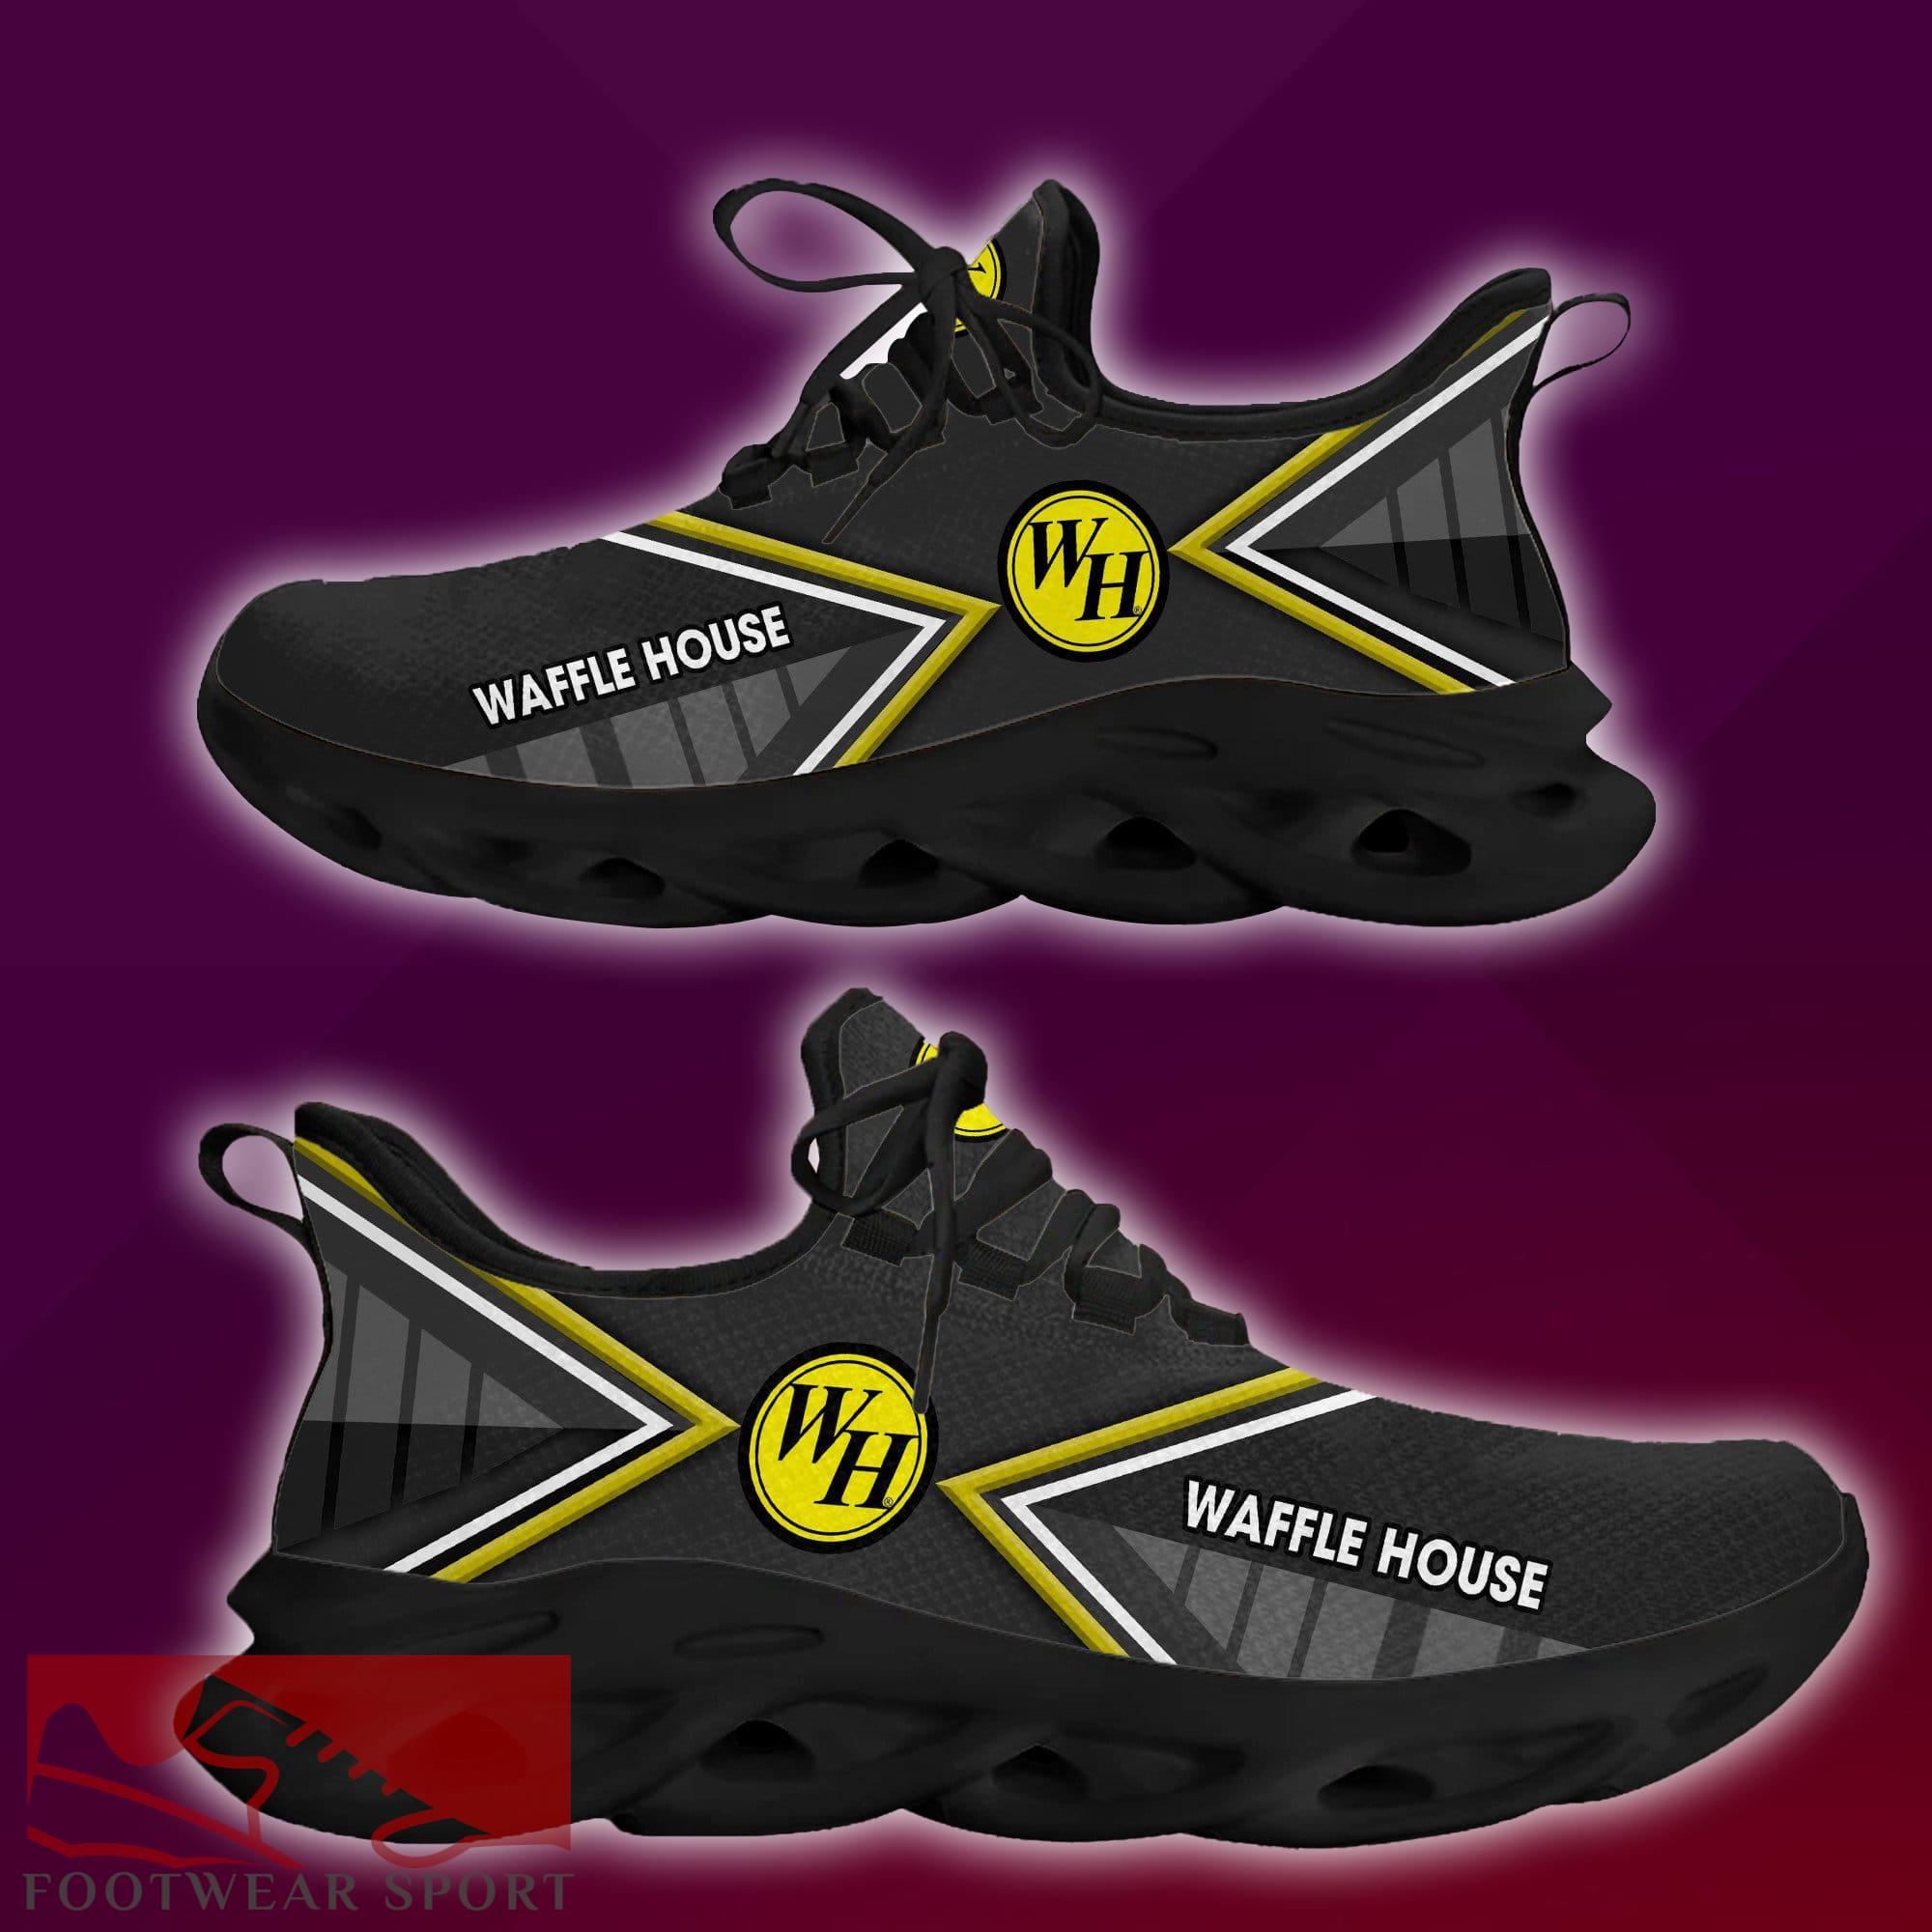 waffle house Brand New Logo Max Soul Sneakers Trendsetting Sport Shoes Gift - waffle house New Brand Chunky Shoes Style Max Soul Sneakers Photo 1